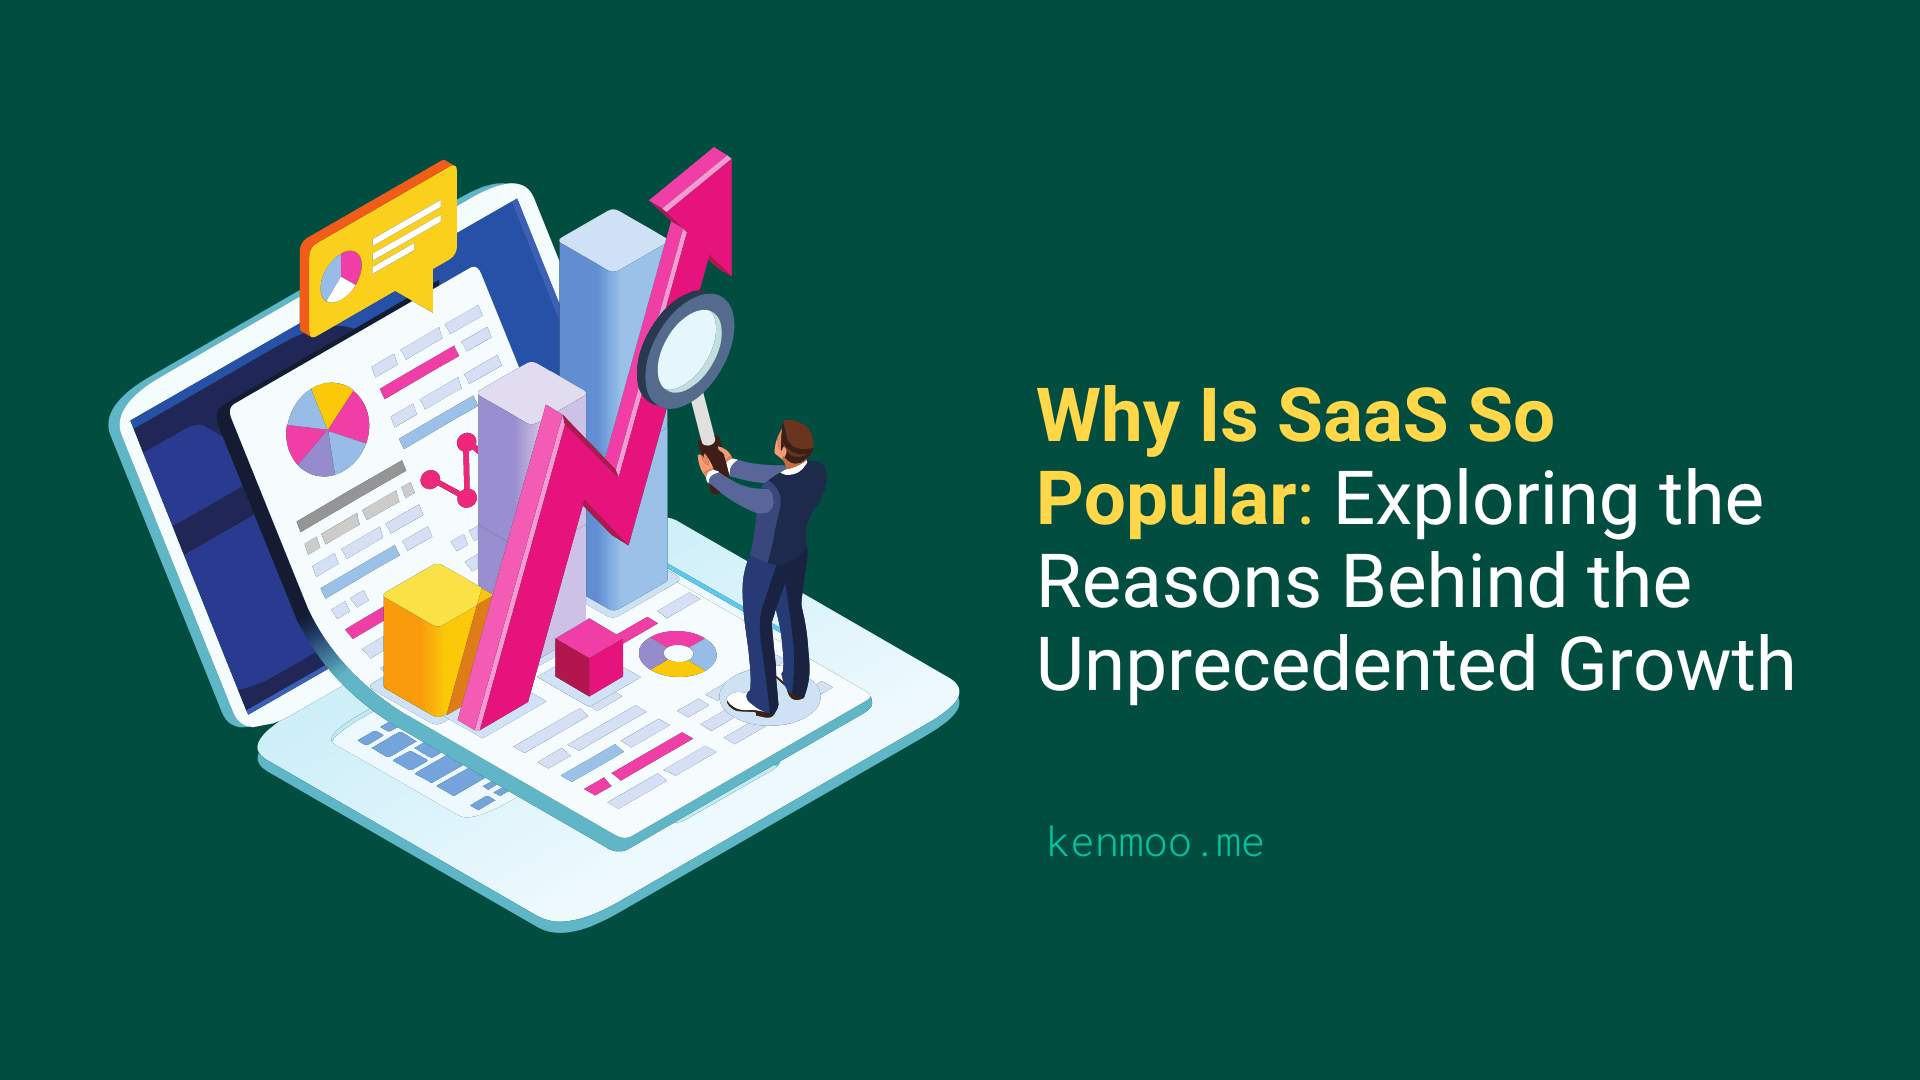 Why Is SaaS So Popular: Exploring the Reasons Behind the Unprecedented Growth